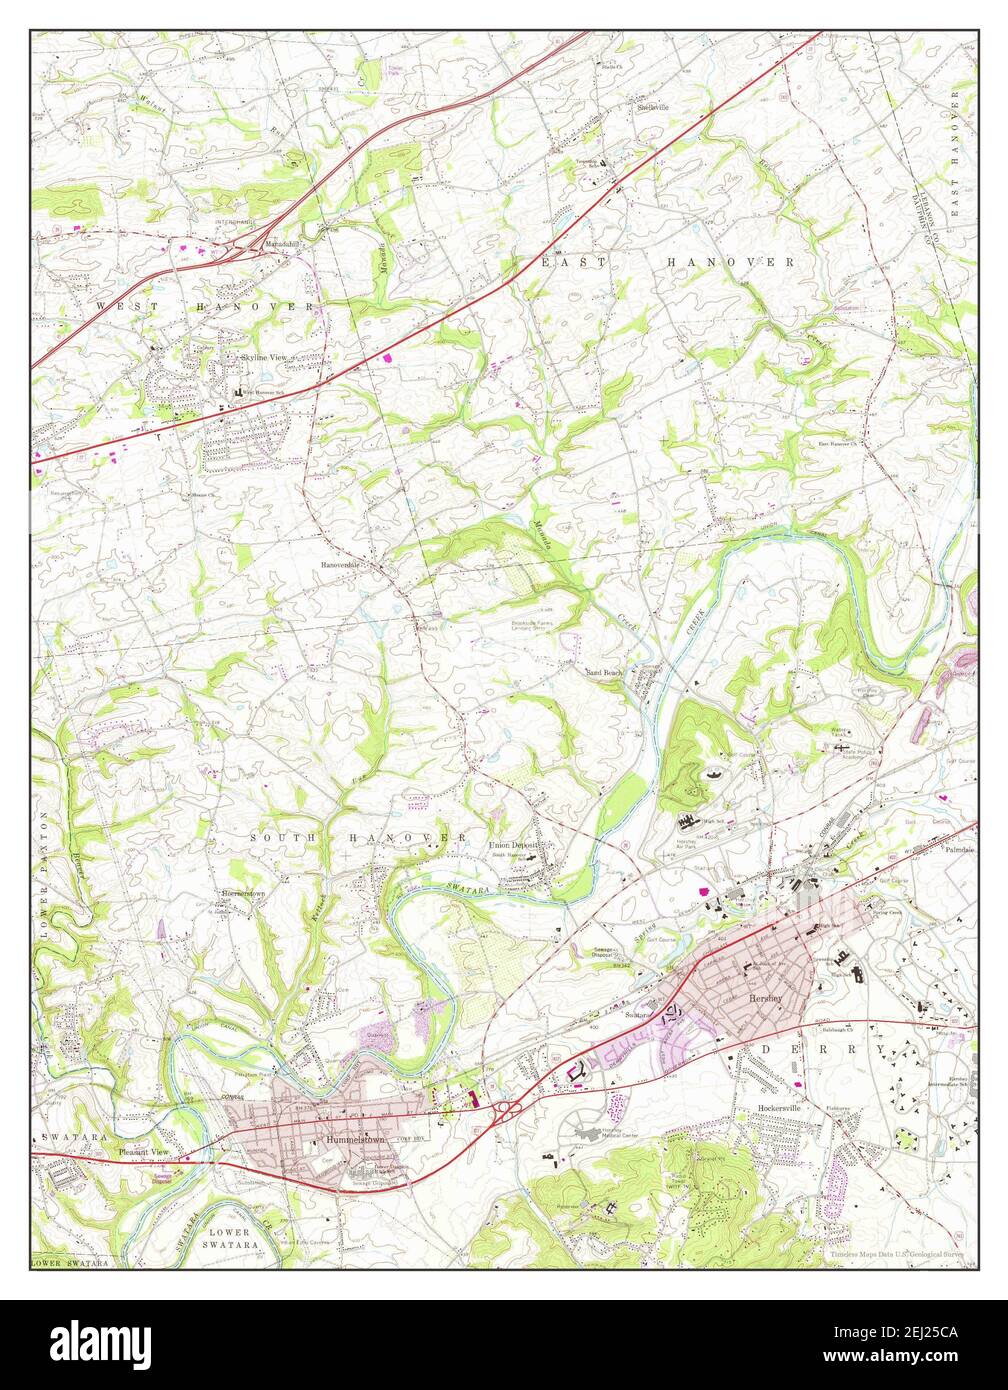 Hershey Pennsylvania Map 1969 124000 United States Of America By Timeless Maps Data Us Geological Survey 2EJ25CA 